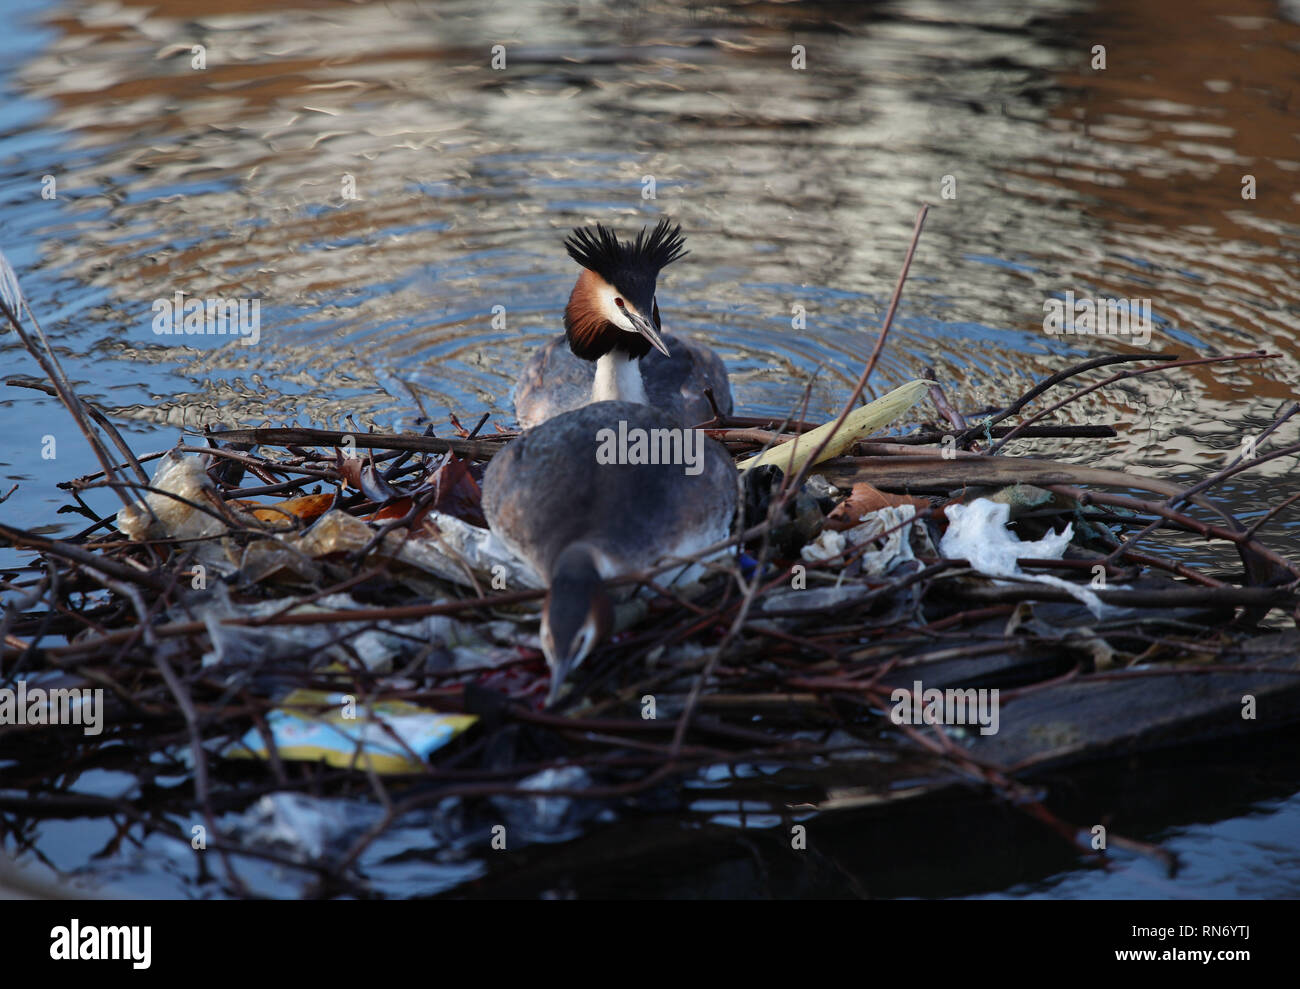 A pair of great crested grebes mating on a nest partially built from discarded litter, on the South Quay of the Isle of Dogs, east London. Stock Photo